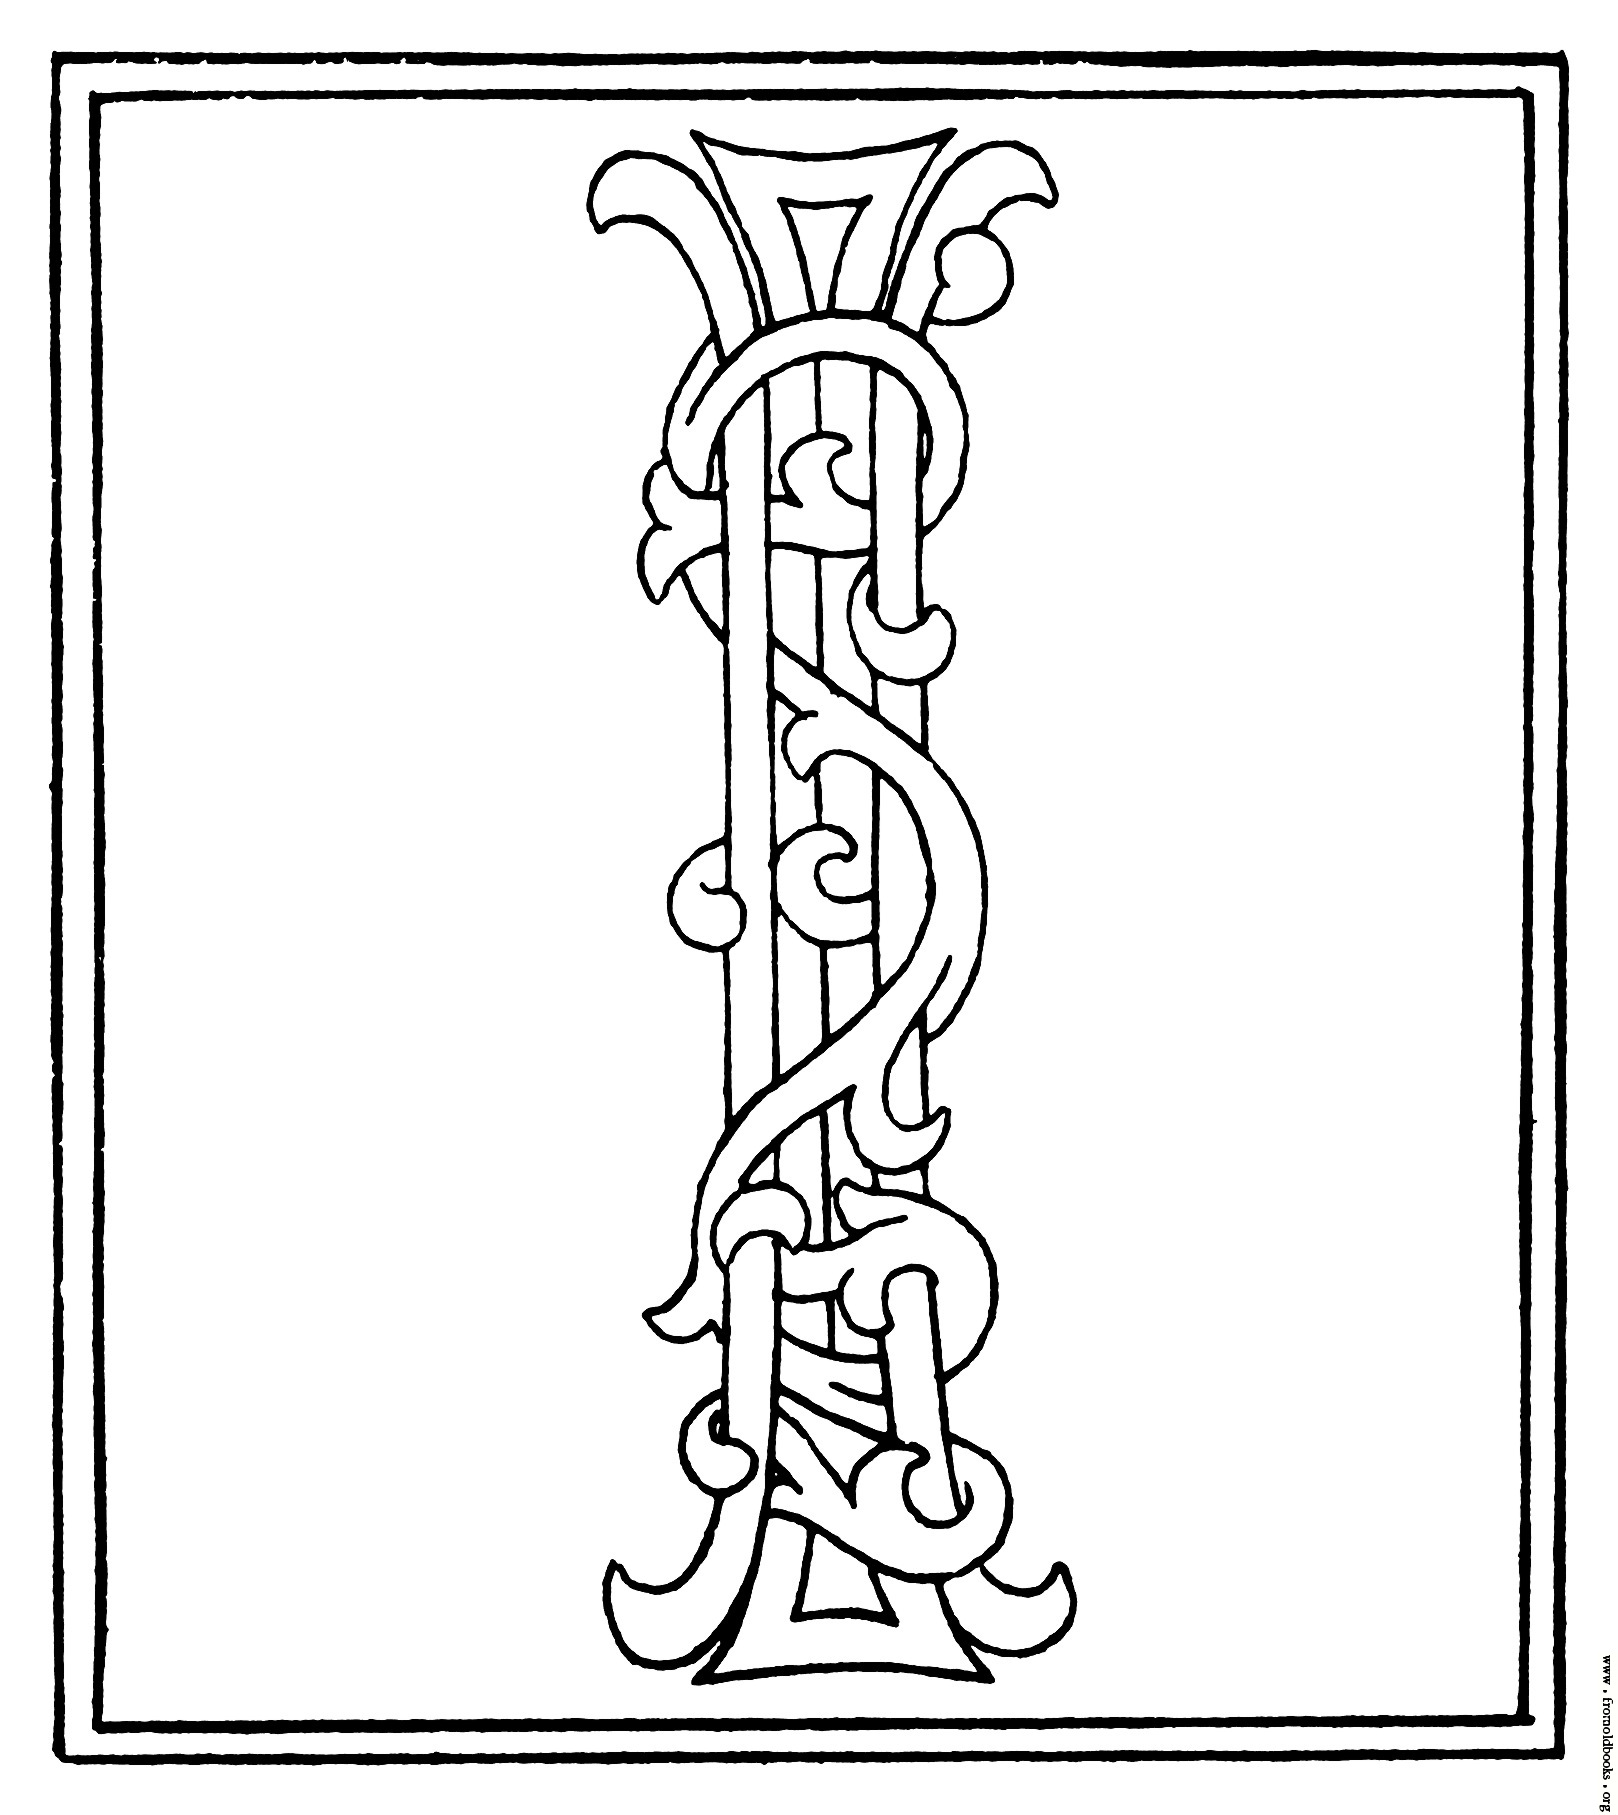 clipart: initial letter I from late 15th century printed book